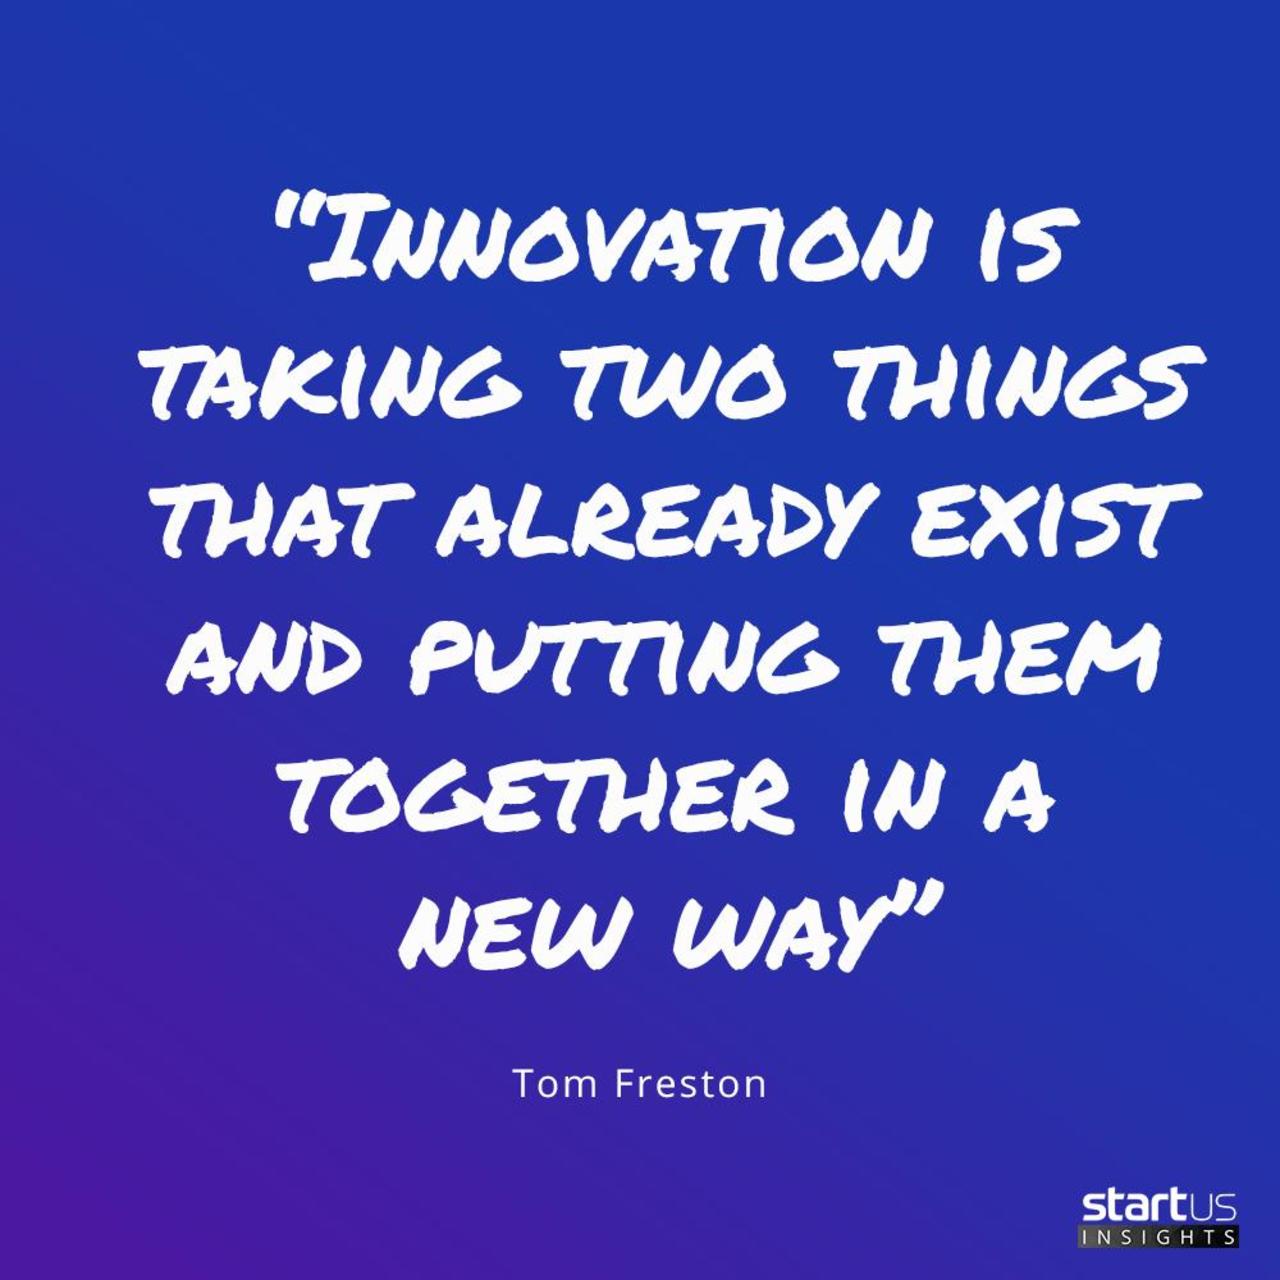 What's your approach to innovation? #innovation #future #strategy https://t.co/CI2Y0H67P1